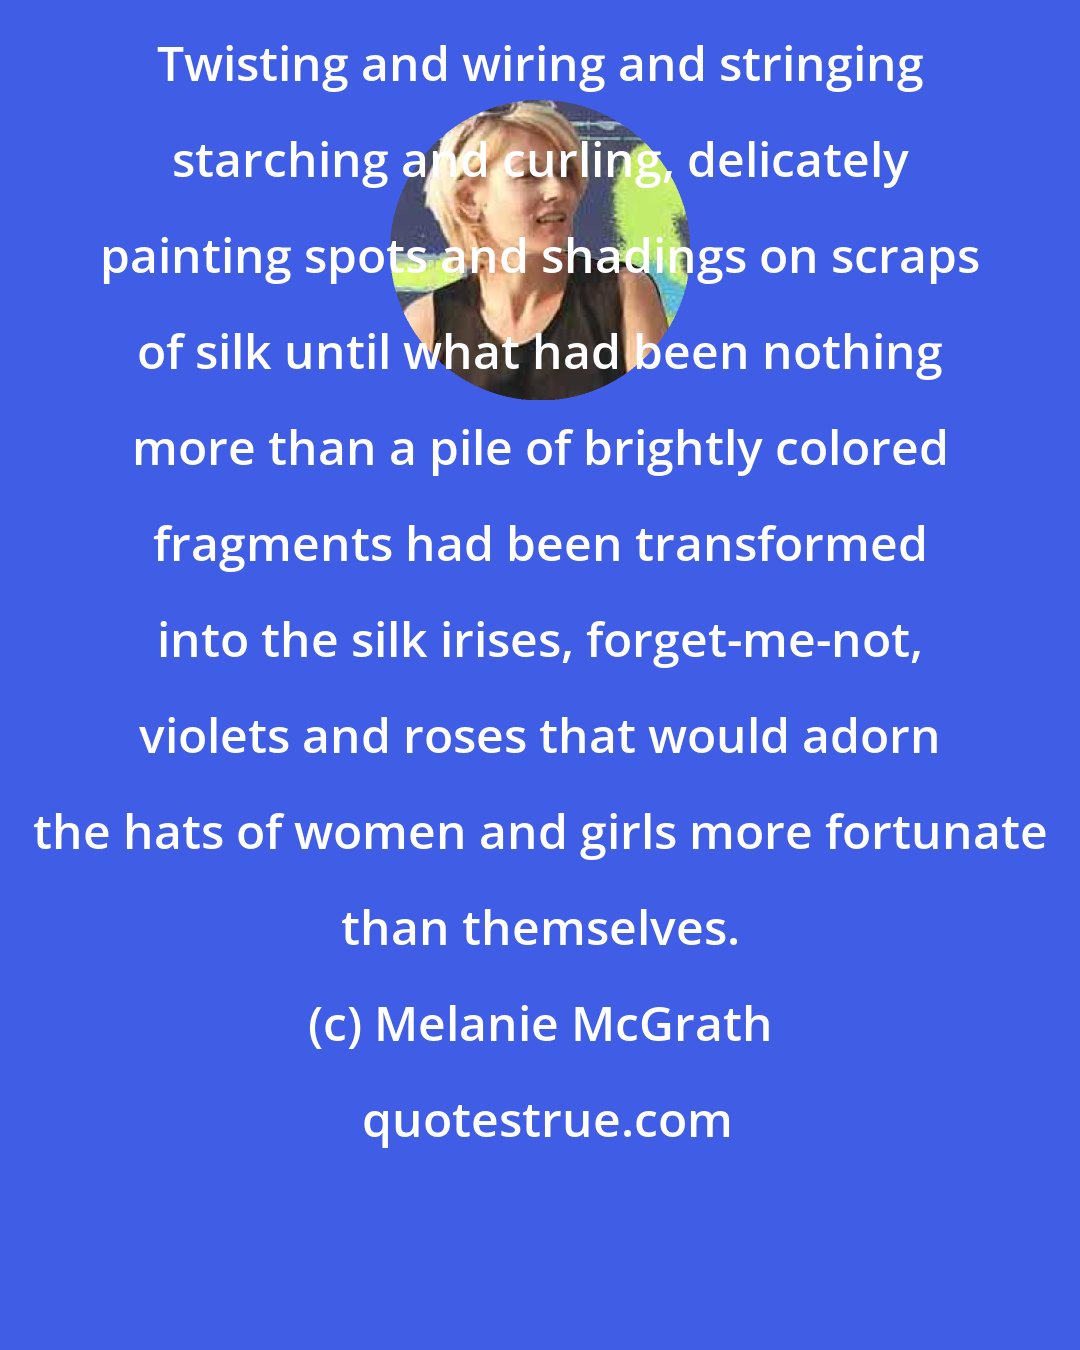 Melanie McGrath: Twisting and wiring and stringing starching and curling, delicately painting spots and shadings on scraps of silk until what had been nothing more than a pile of brightly colored fragments had been transformed into the silk irises, forget-me-not, violets and roses that would adorn the hats of women and girls more fortunate than themselves.